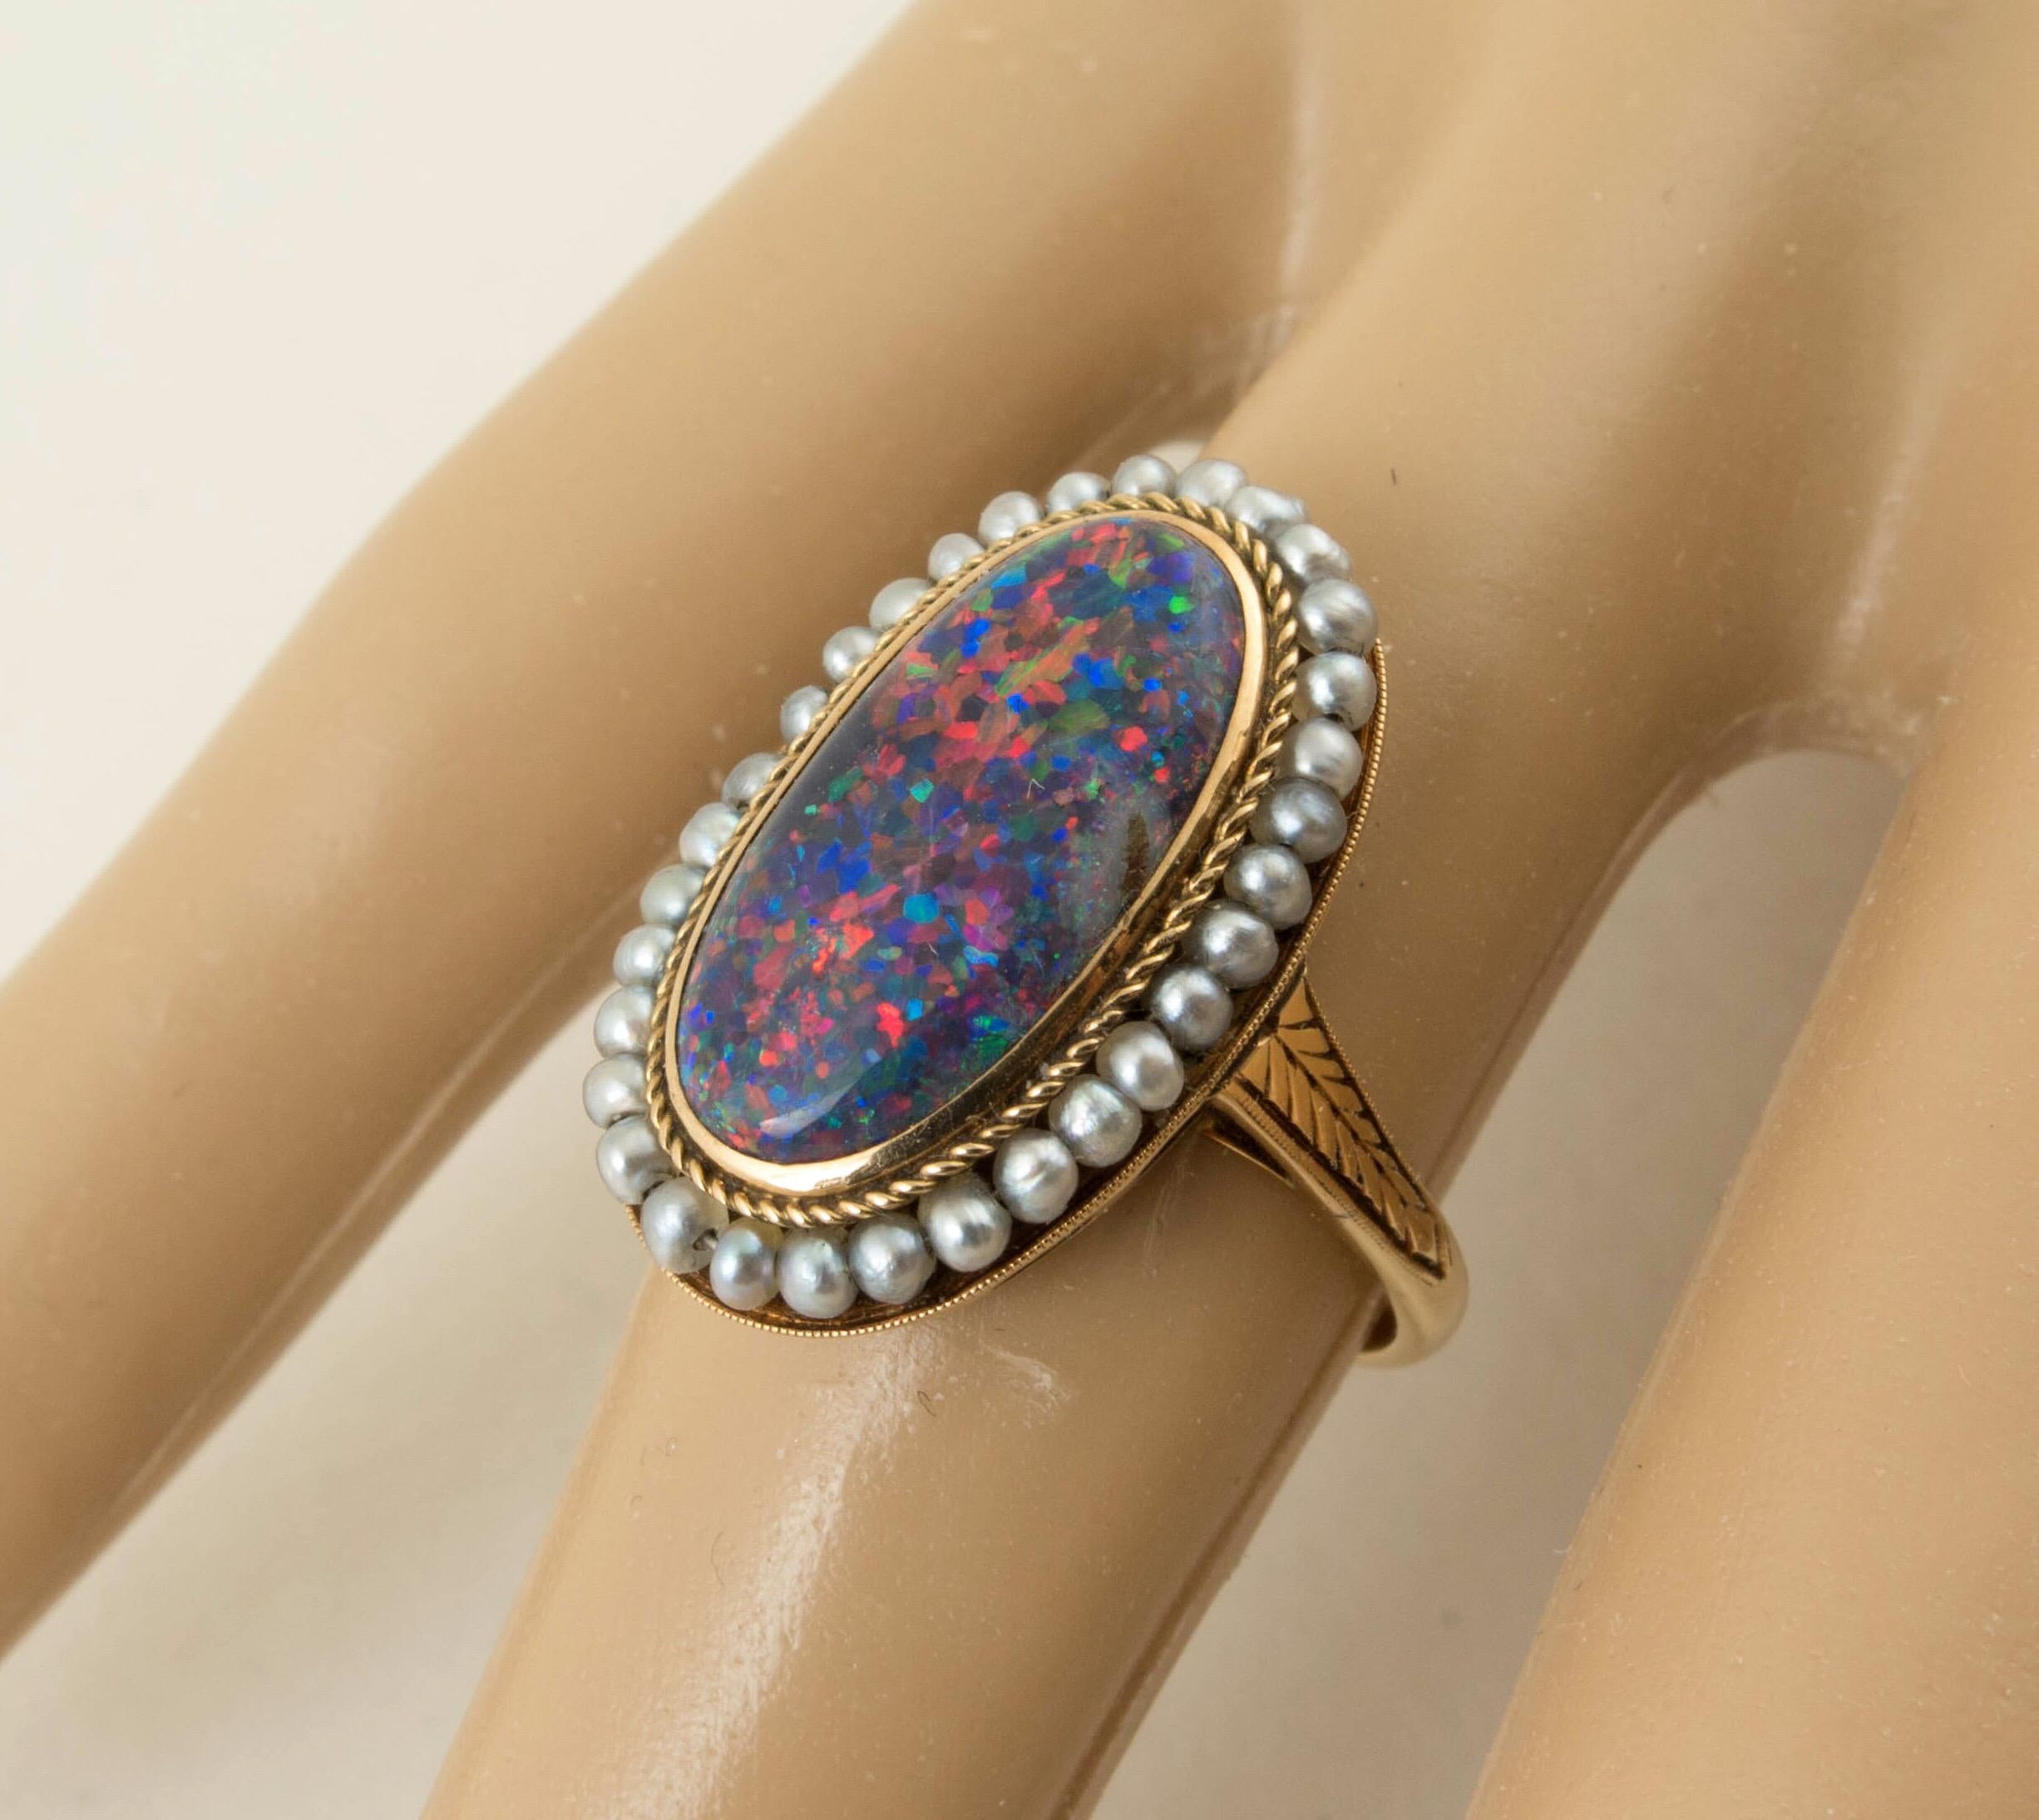 A beautiful late Victorian black opal and natural seed pearl gold ring. The black opal is approximate 2 carat oval cabochon cut pinfire black opal with predominant red color. Pinfire pattern with red/ violet/cyan/green. There are 32 natural seed